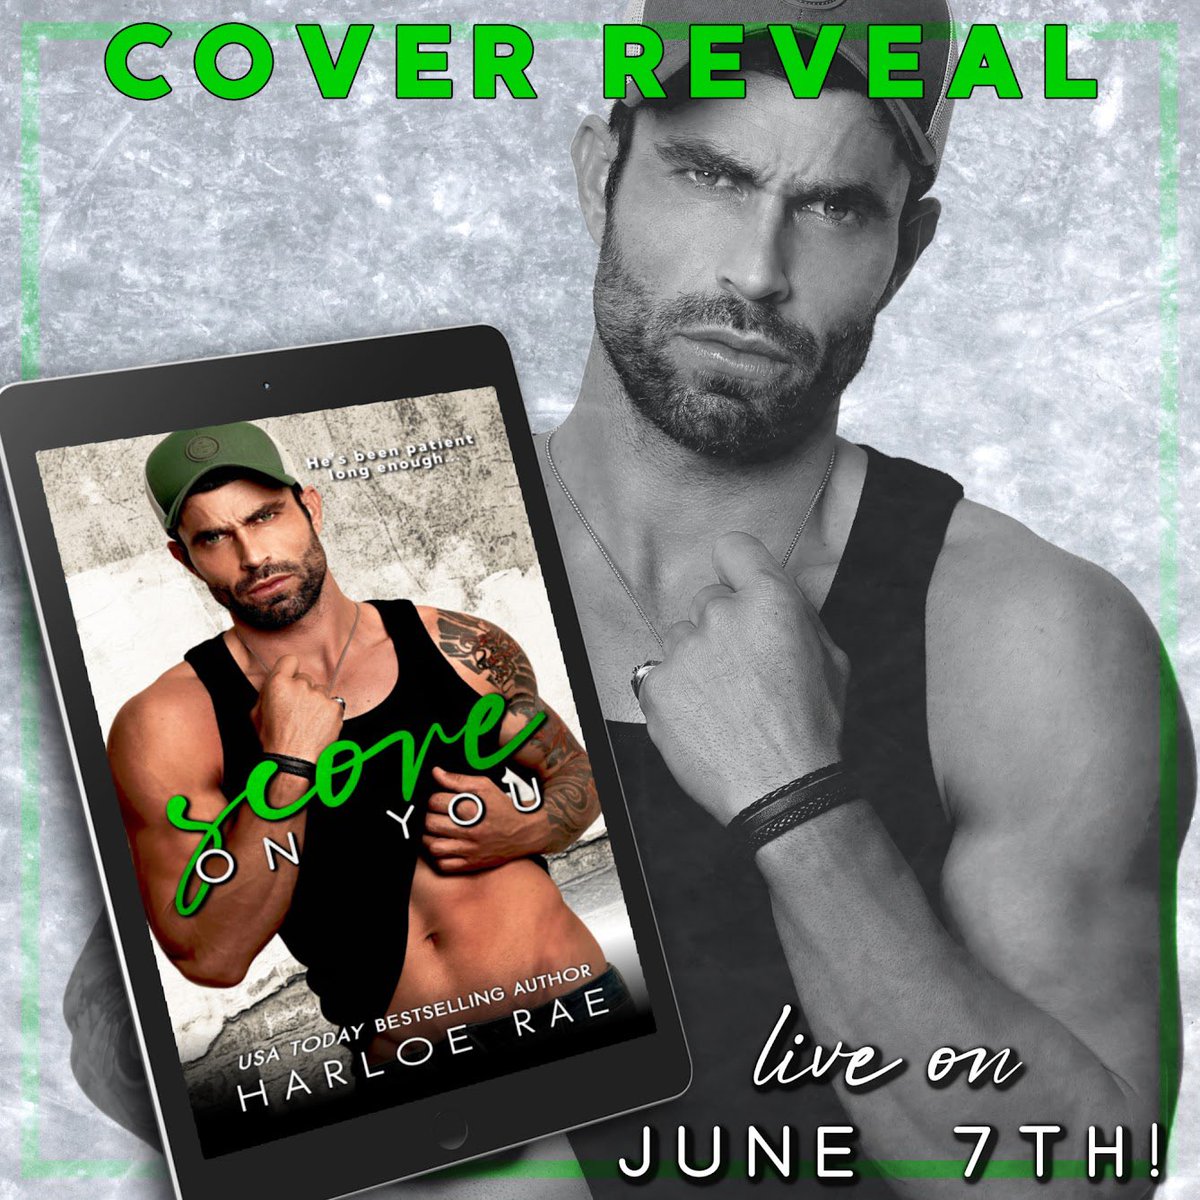 Get ready for the cover reveal of Score on You by @harloerae! Don't miss out on this captivating tale of choice, courage, and unexpected love! Stay tuned for the release on June 7th! Pre-order your copy now: book.harloerae.com/ScoreOnYou